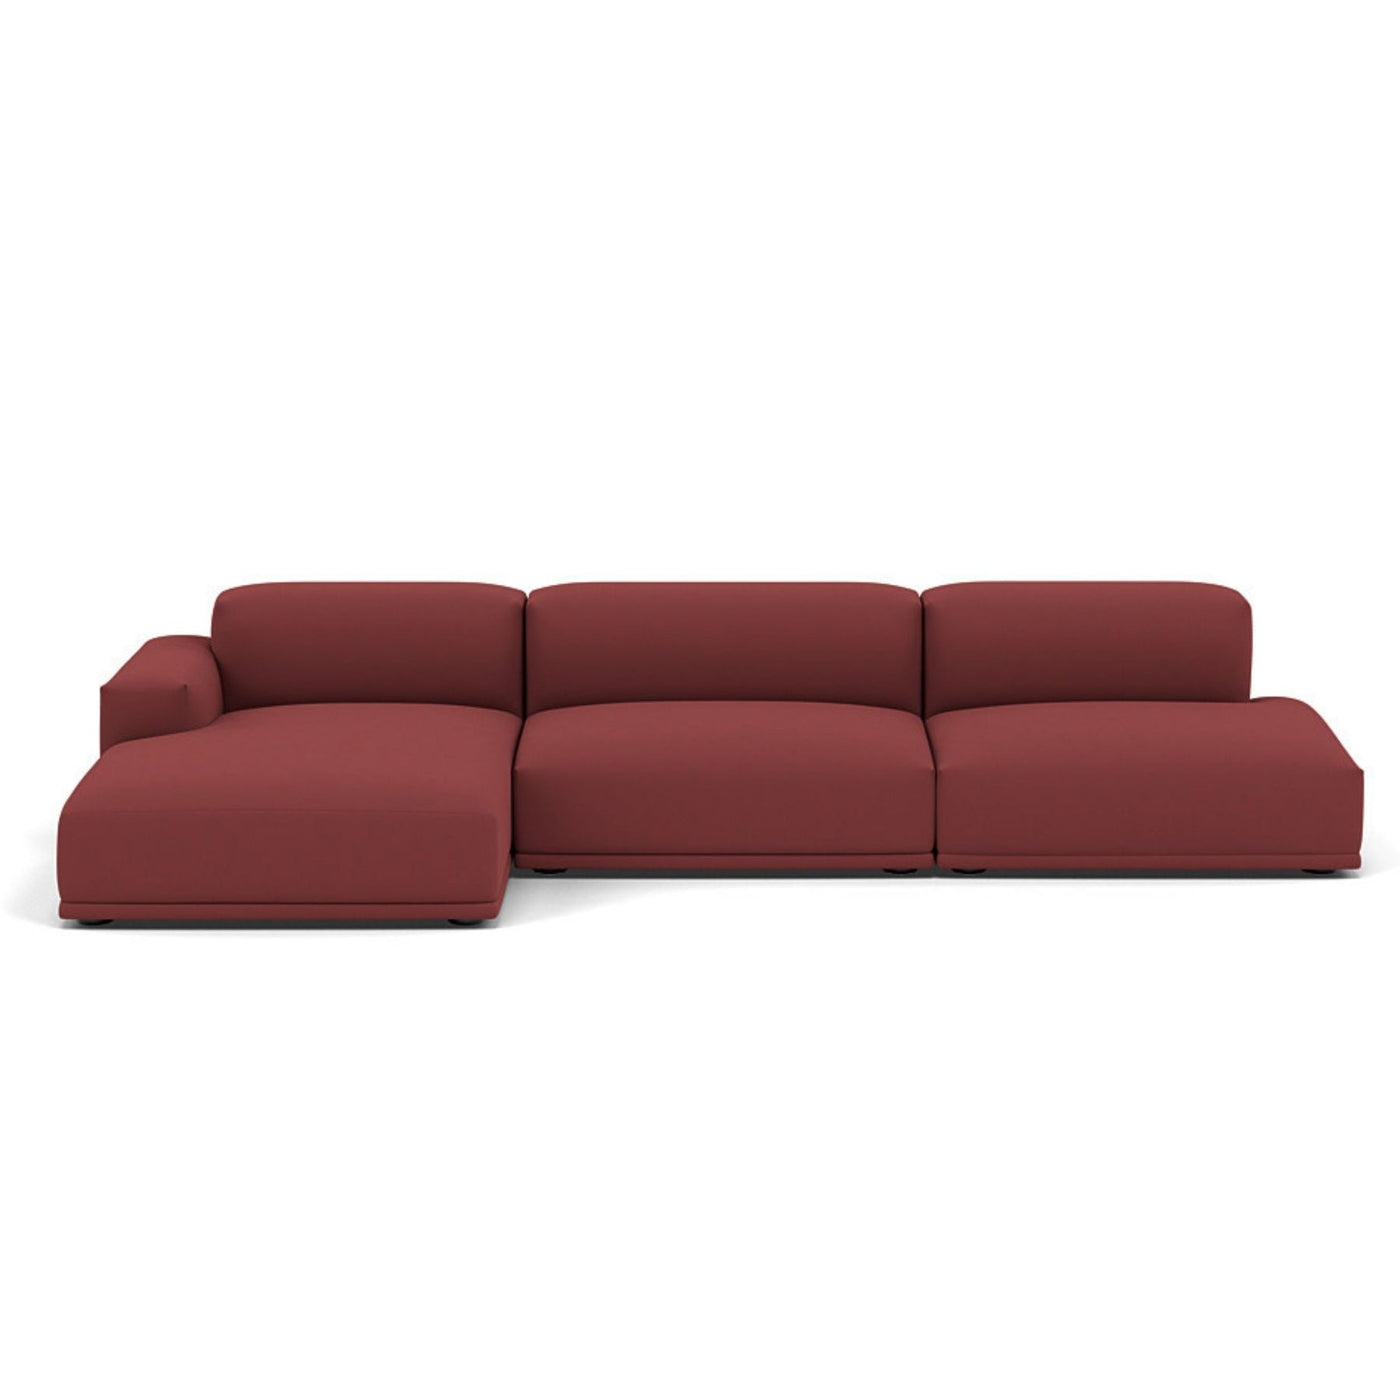 Muuto Connect modular sofa 3 seater in configuration 3. Made to order from someday designs. #colour_rime-591